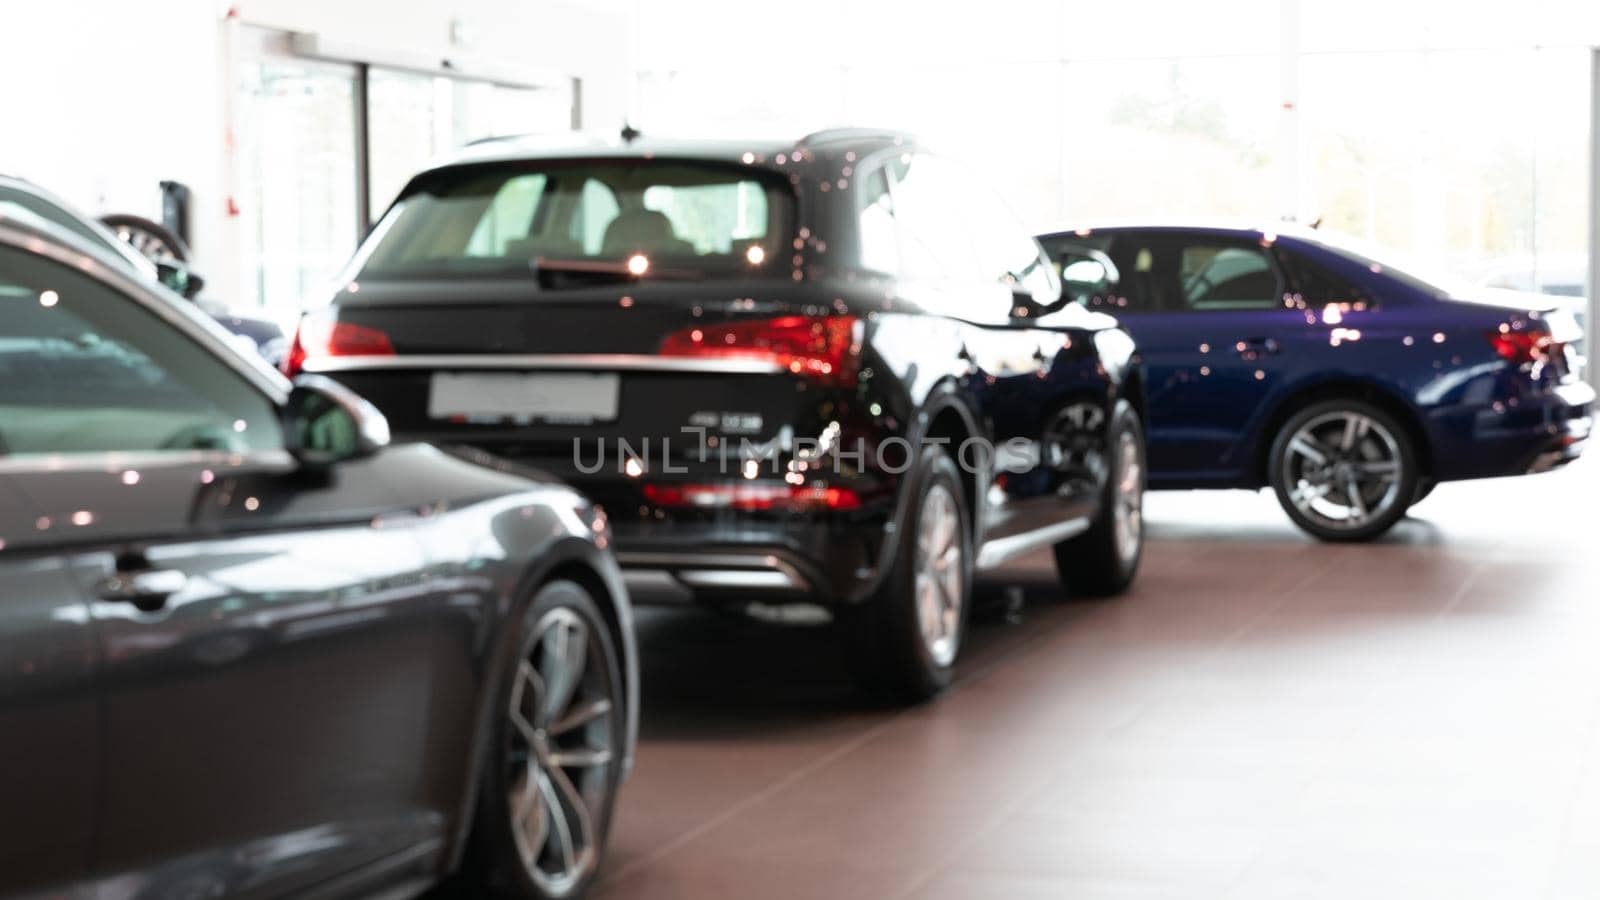 dealership selling premium SUVs, blurred photo with depth of field for background.